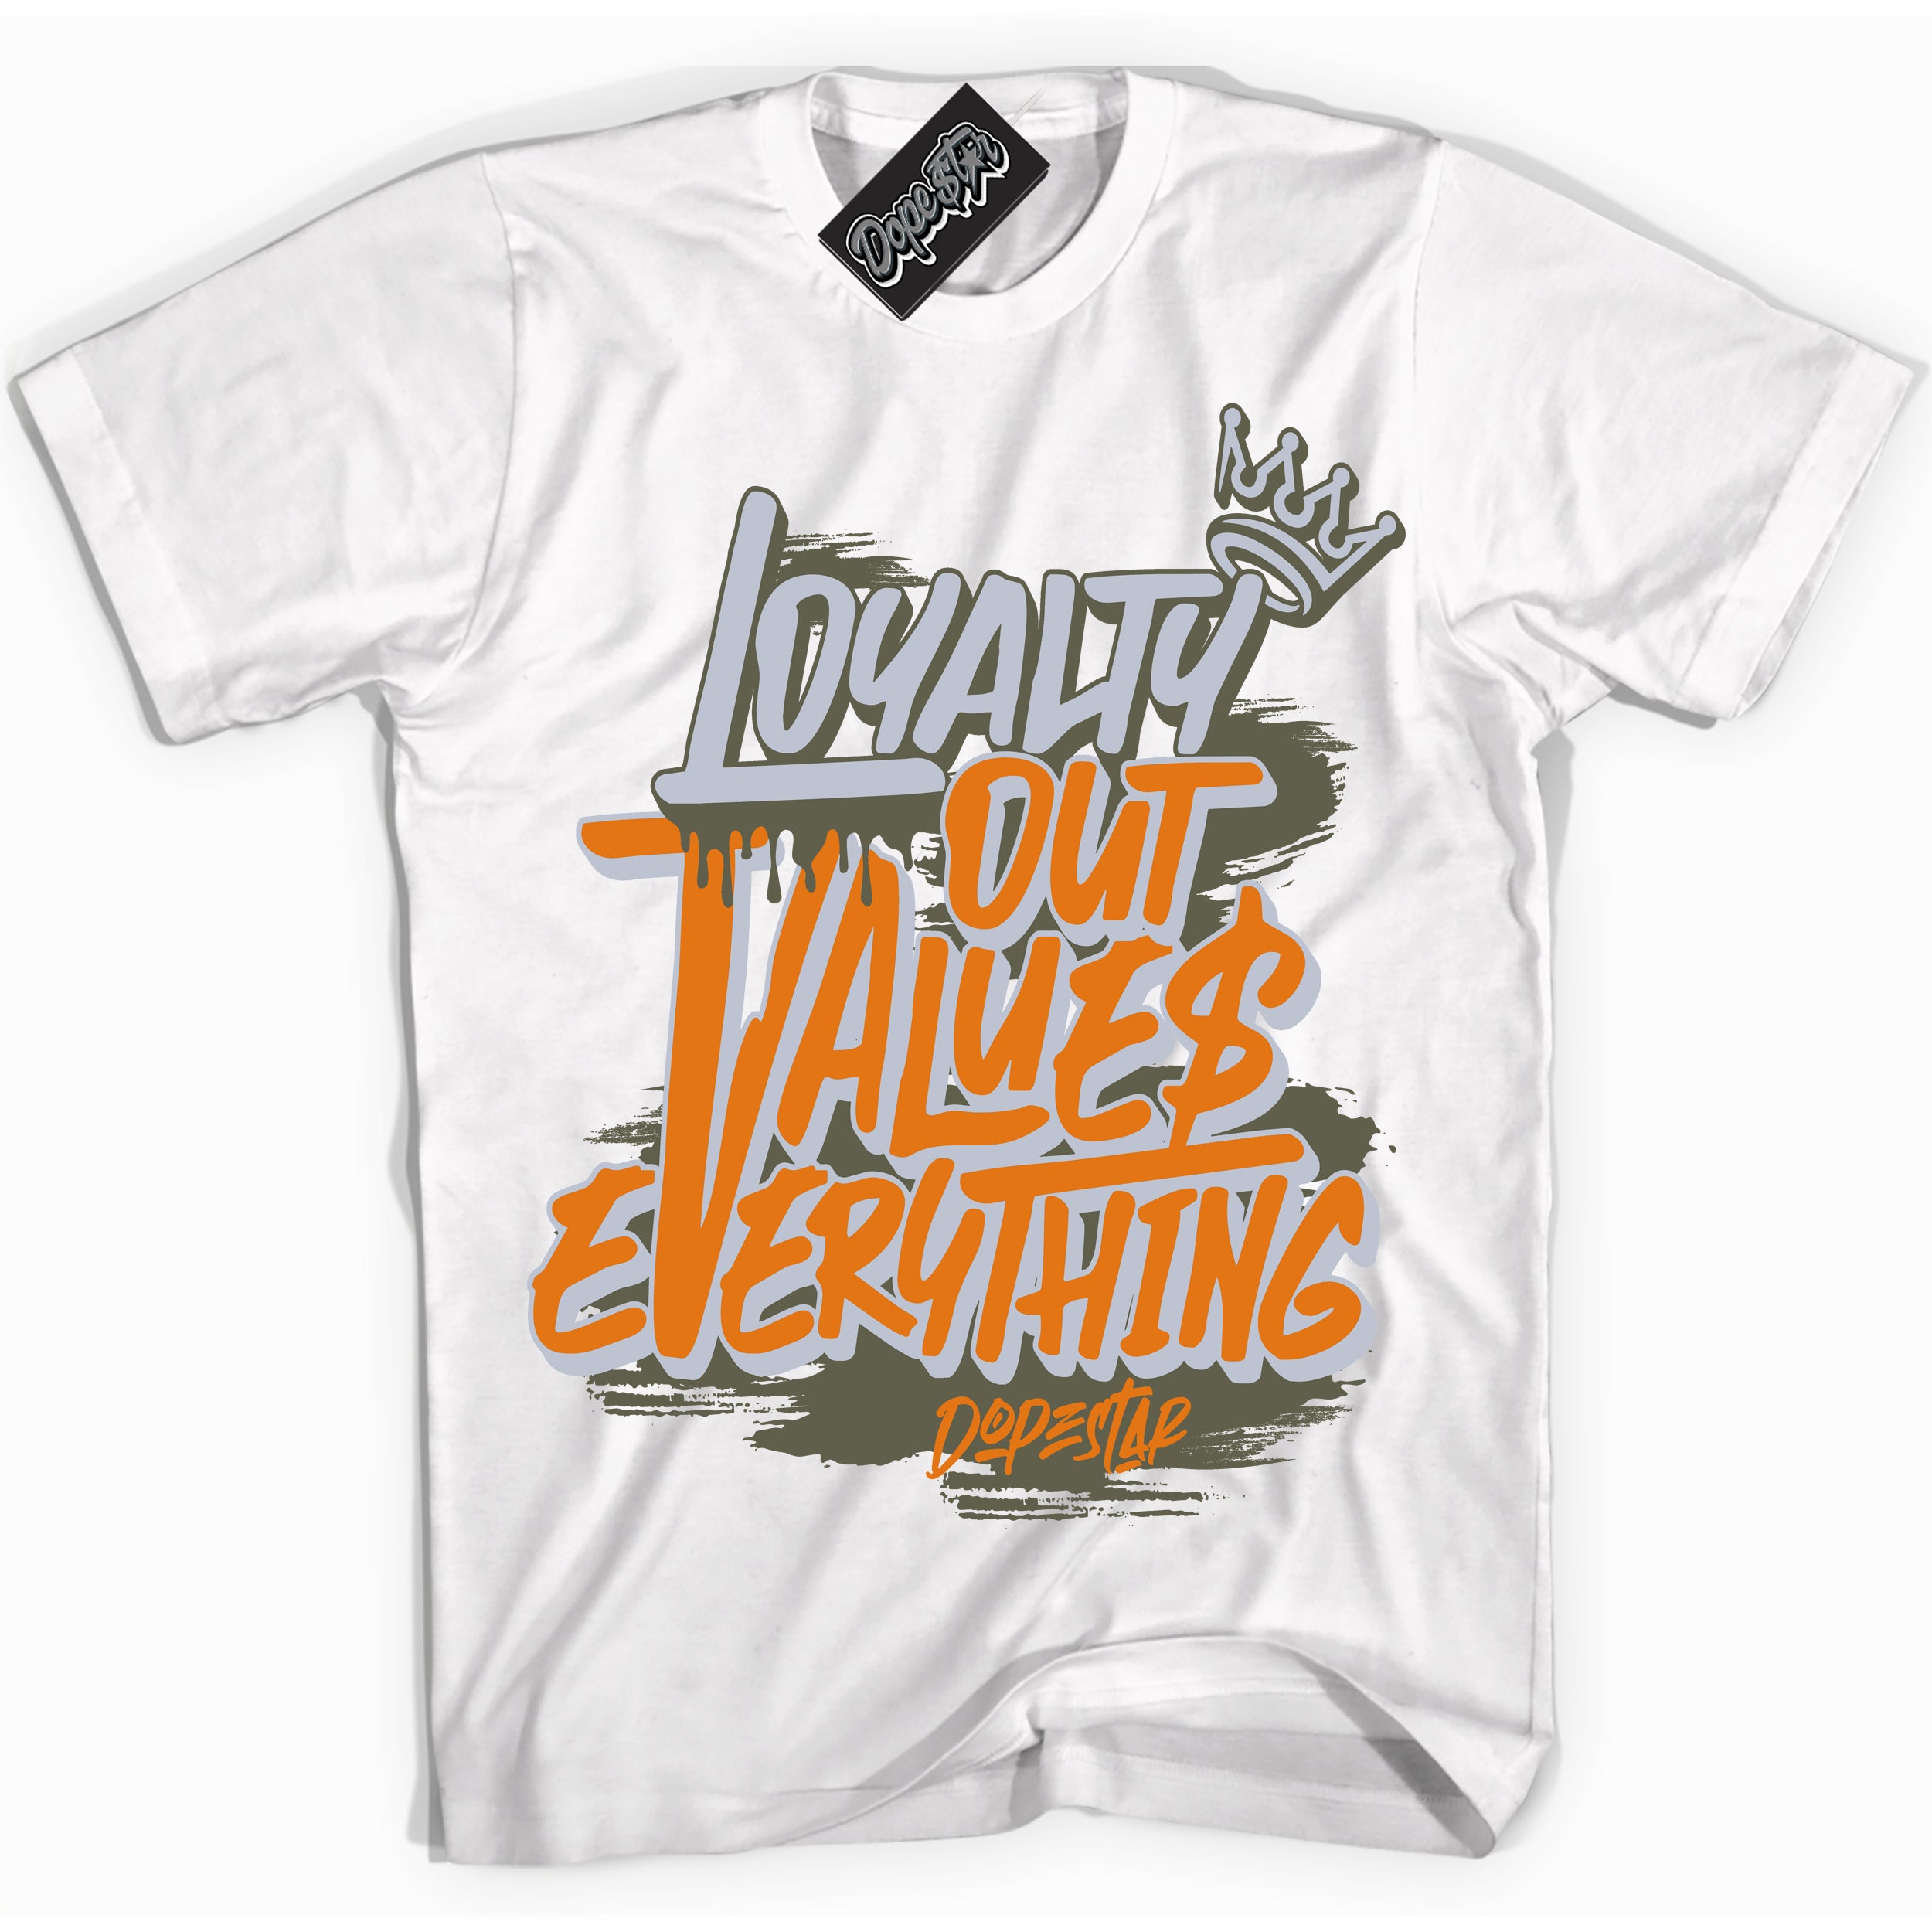 Cool White Shirt with “ Loyalty Out Values Everything” design that perfectly matches Olive 5s Sneakers.